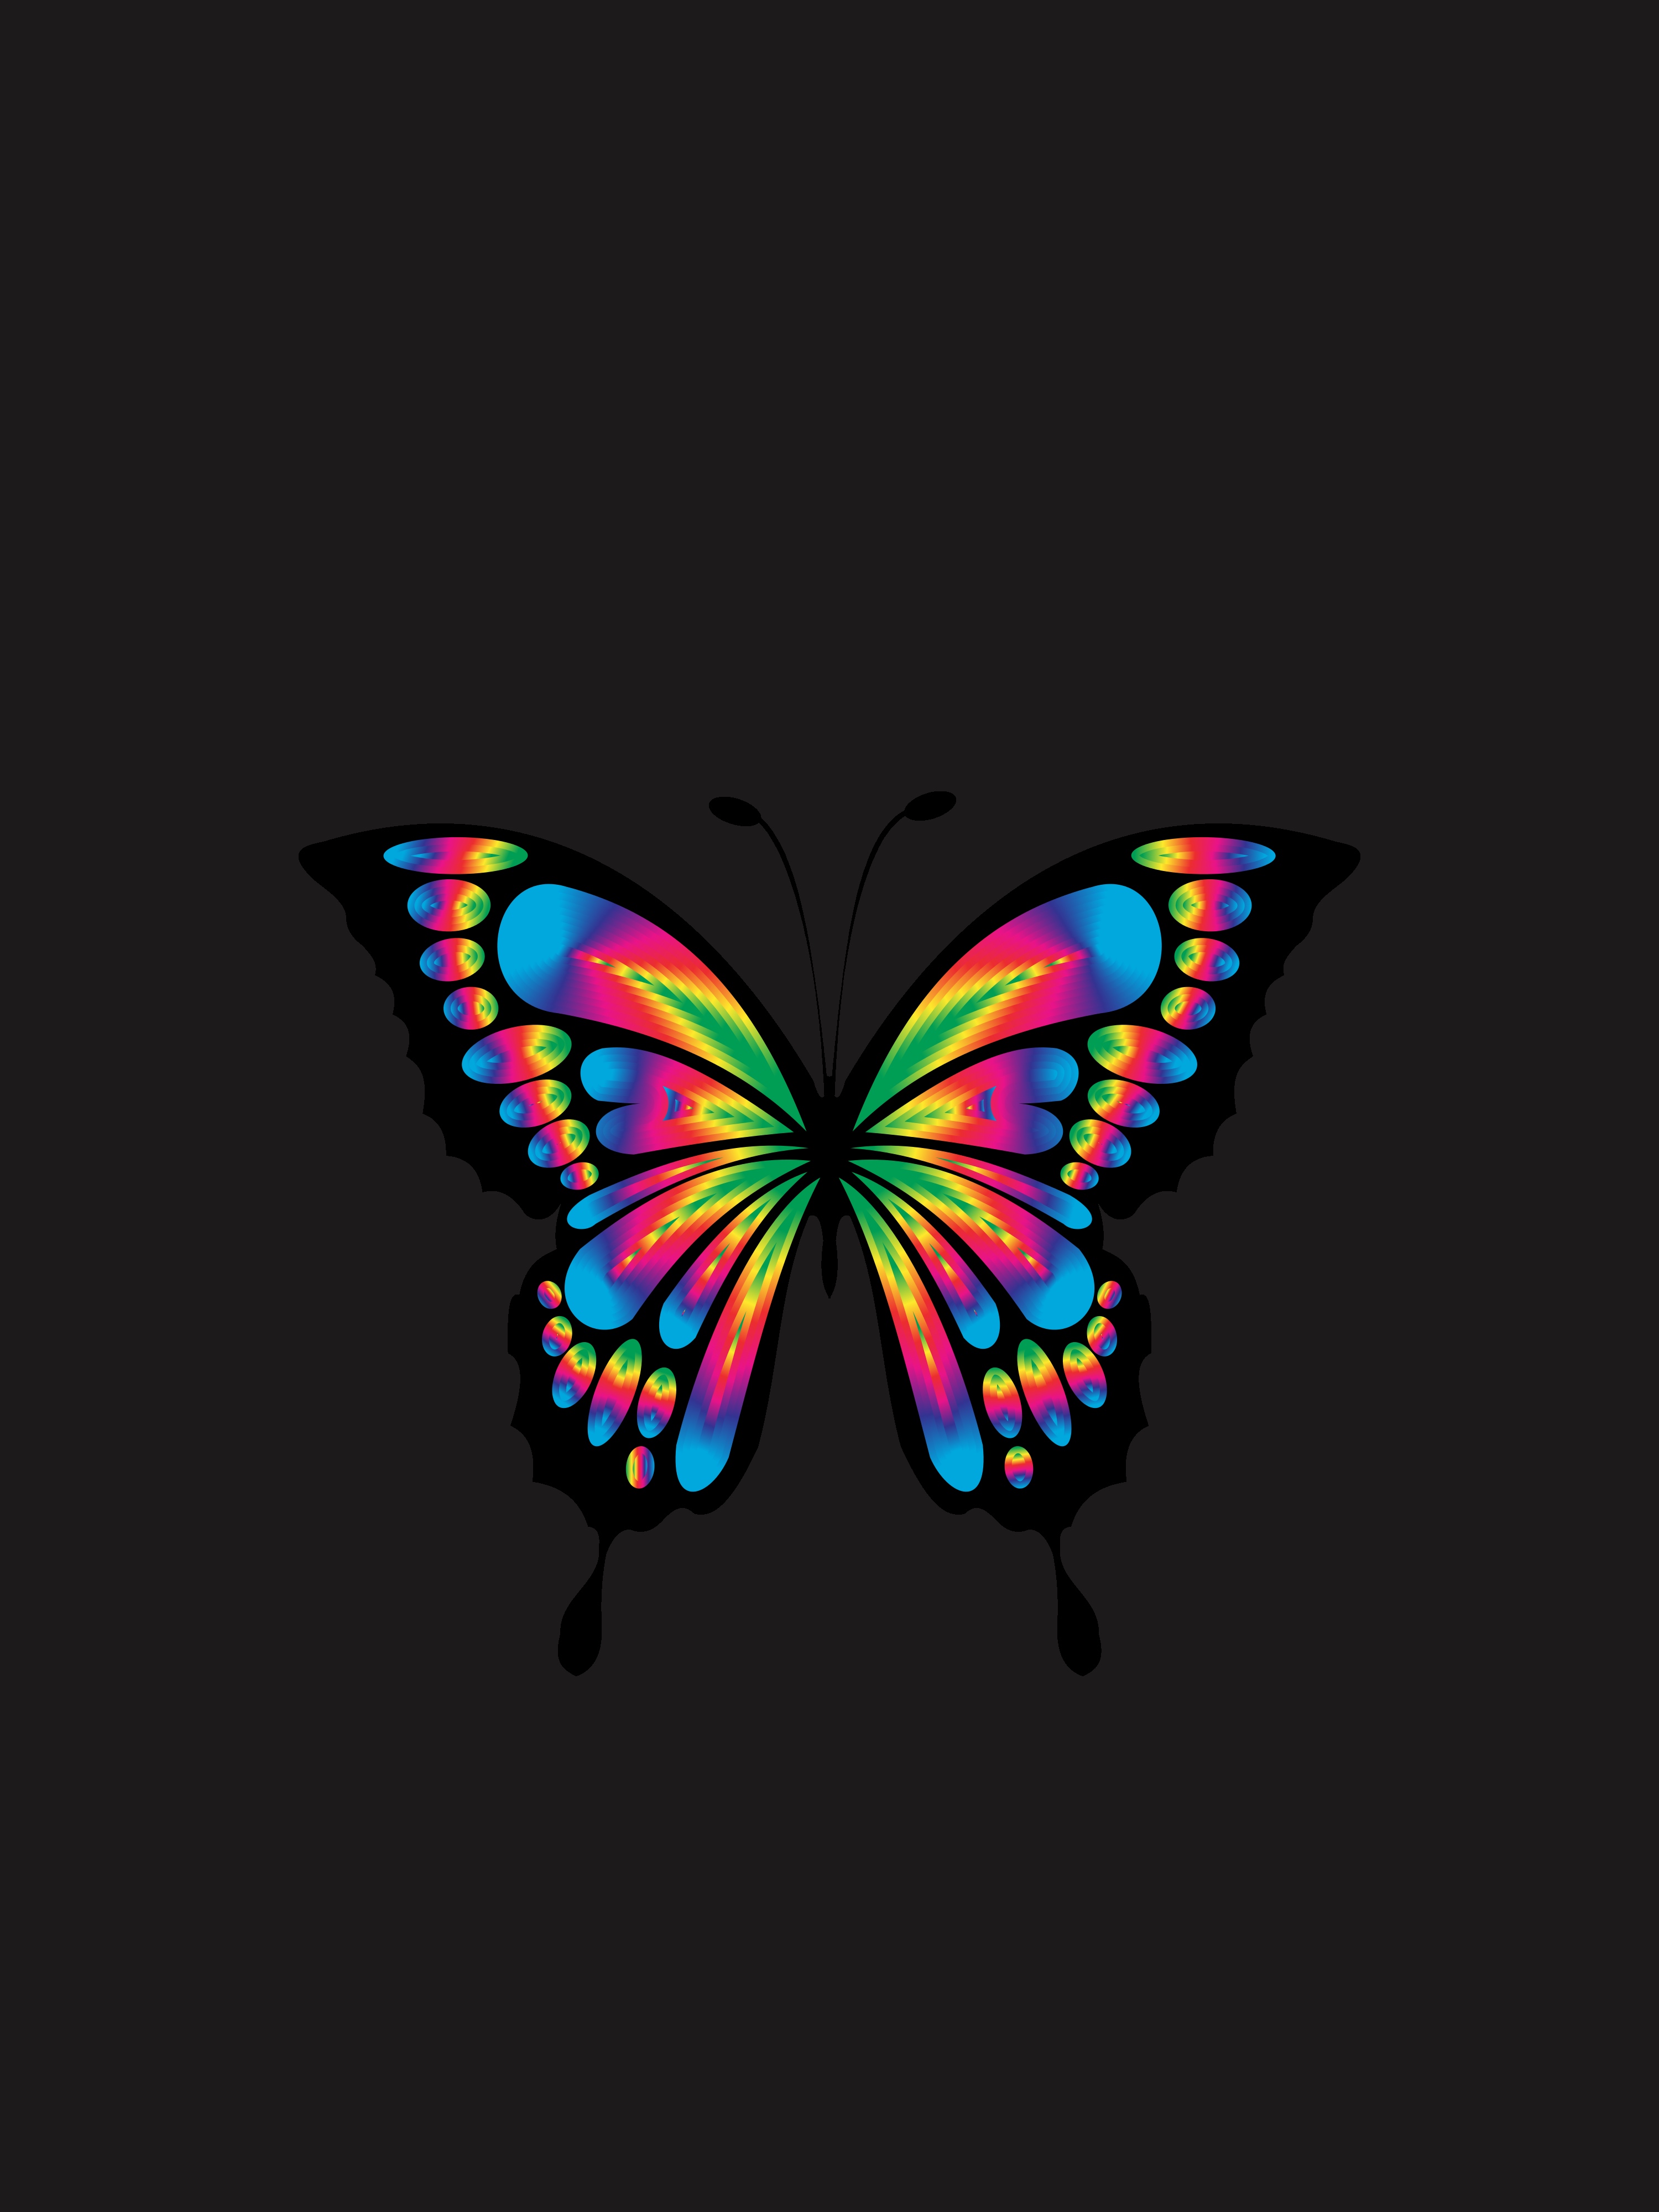 Free Images  Butterfly